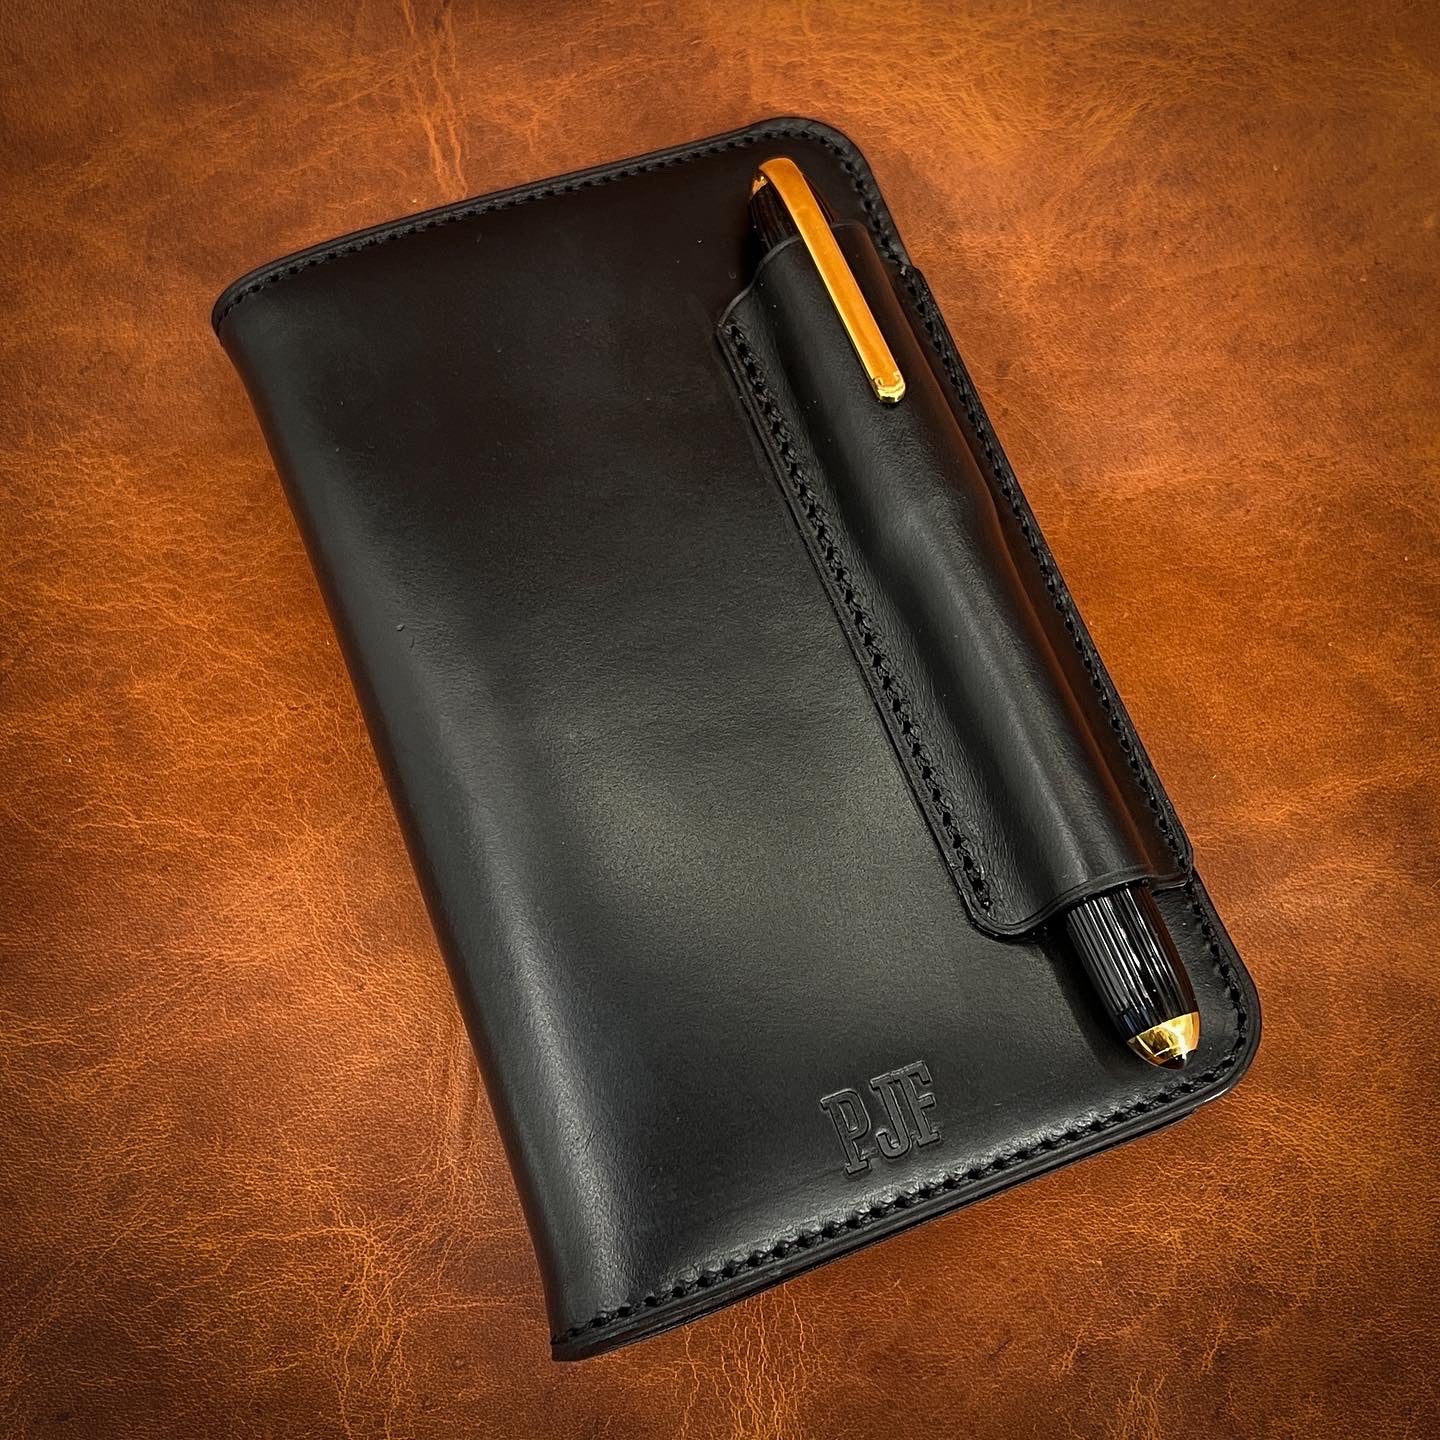 Executive Style Notebook Cover with Cartier Pen in Black CXL Horween Leather.  Handmade by Custom Leather and Pen in Houston, TX